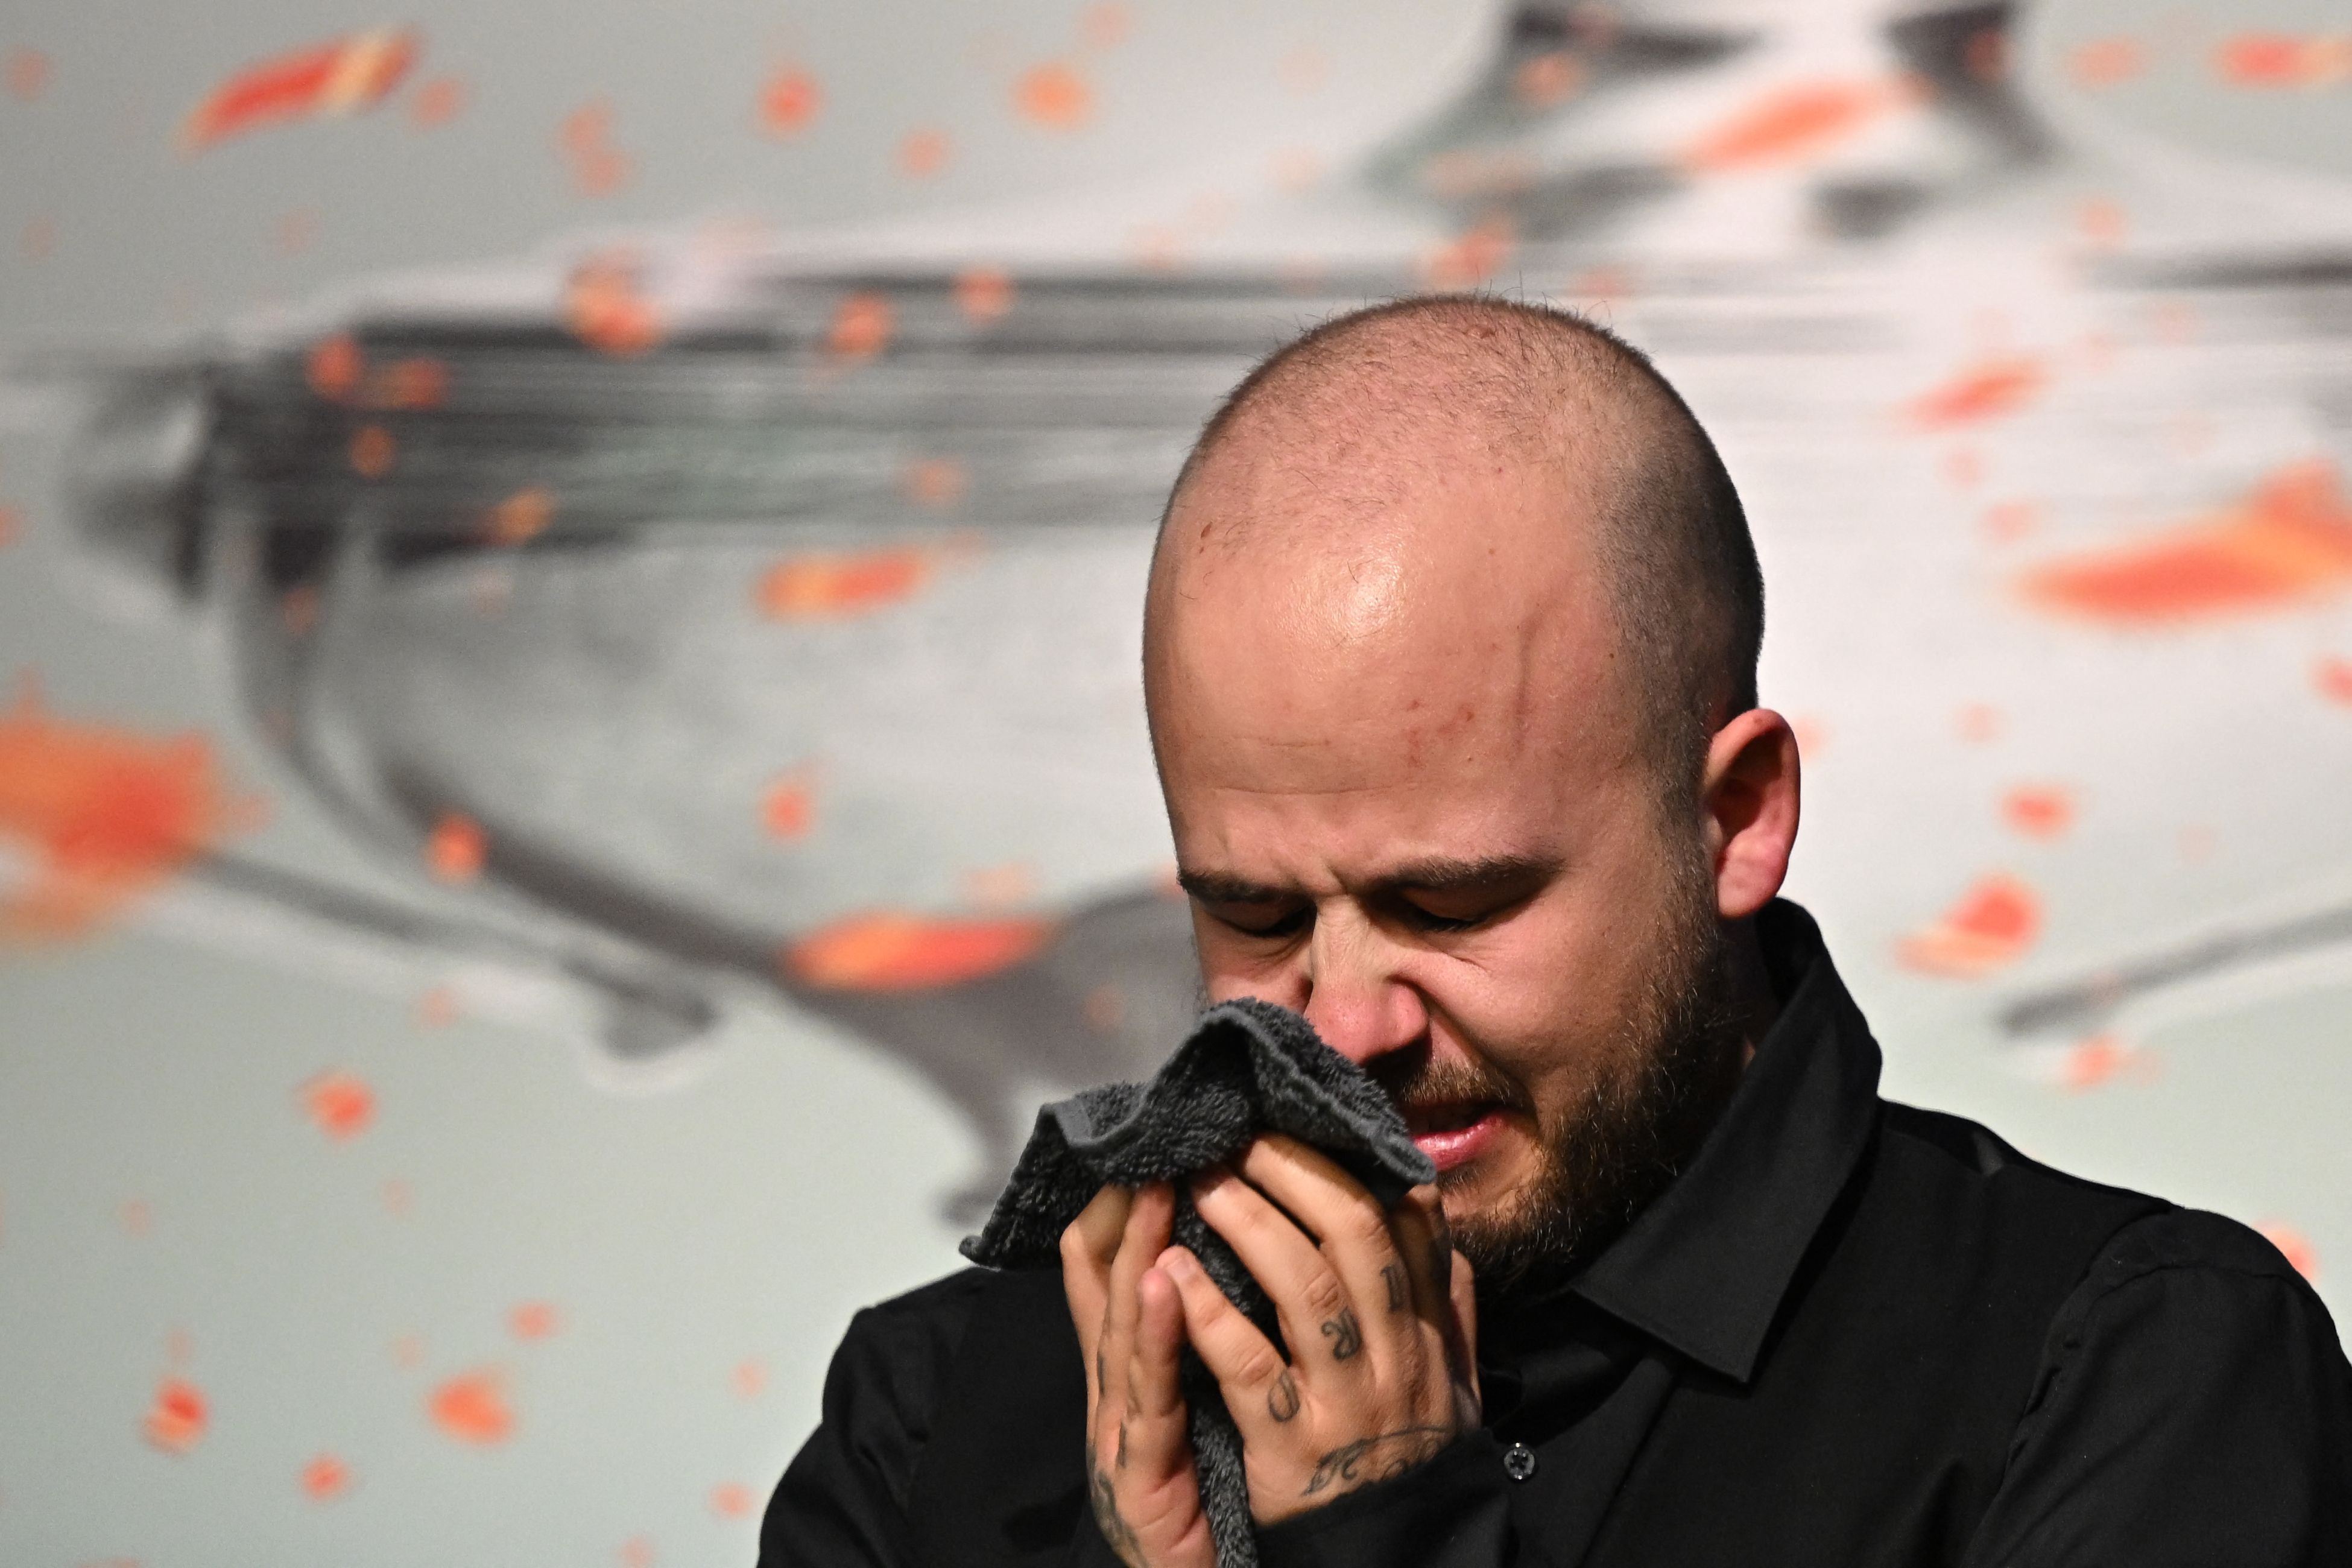 Luca Brecel weeps after winning the Snooker World Championship